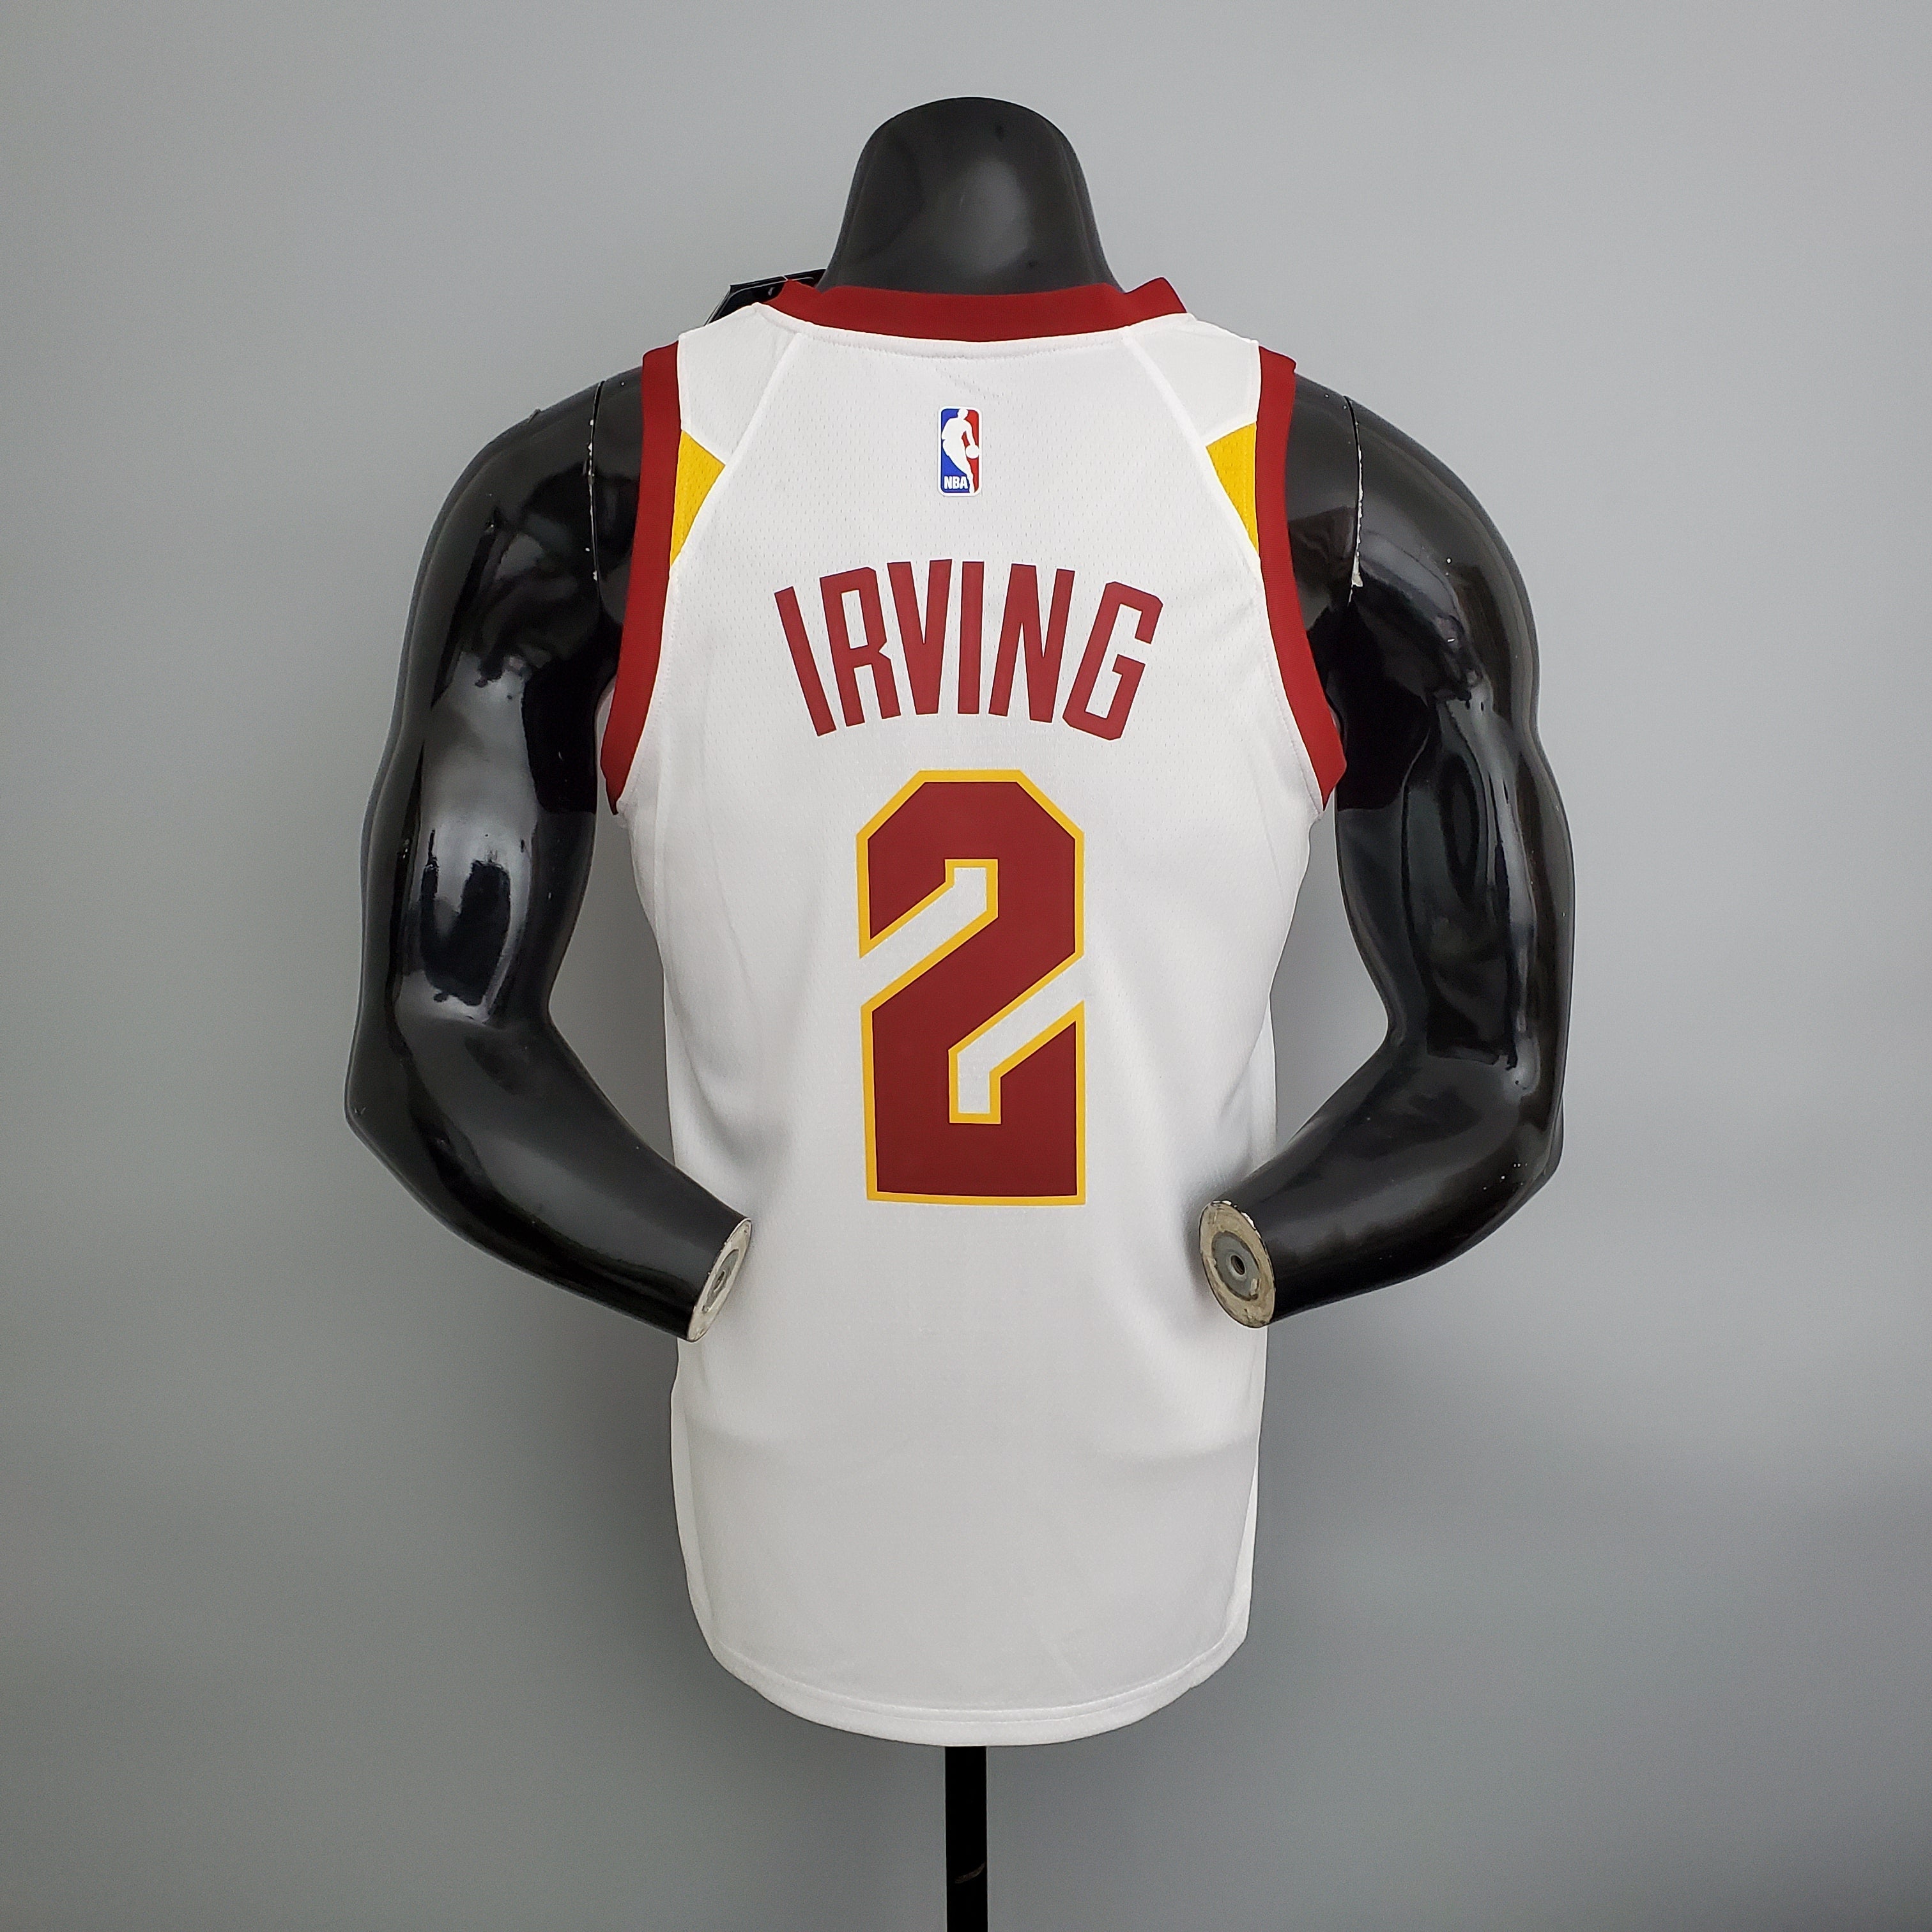 Maillot Cleveland Cavaliers 2 Irving NBA Basket